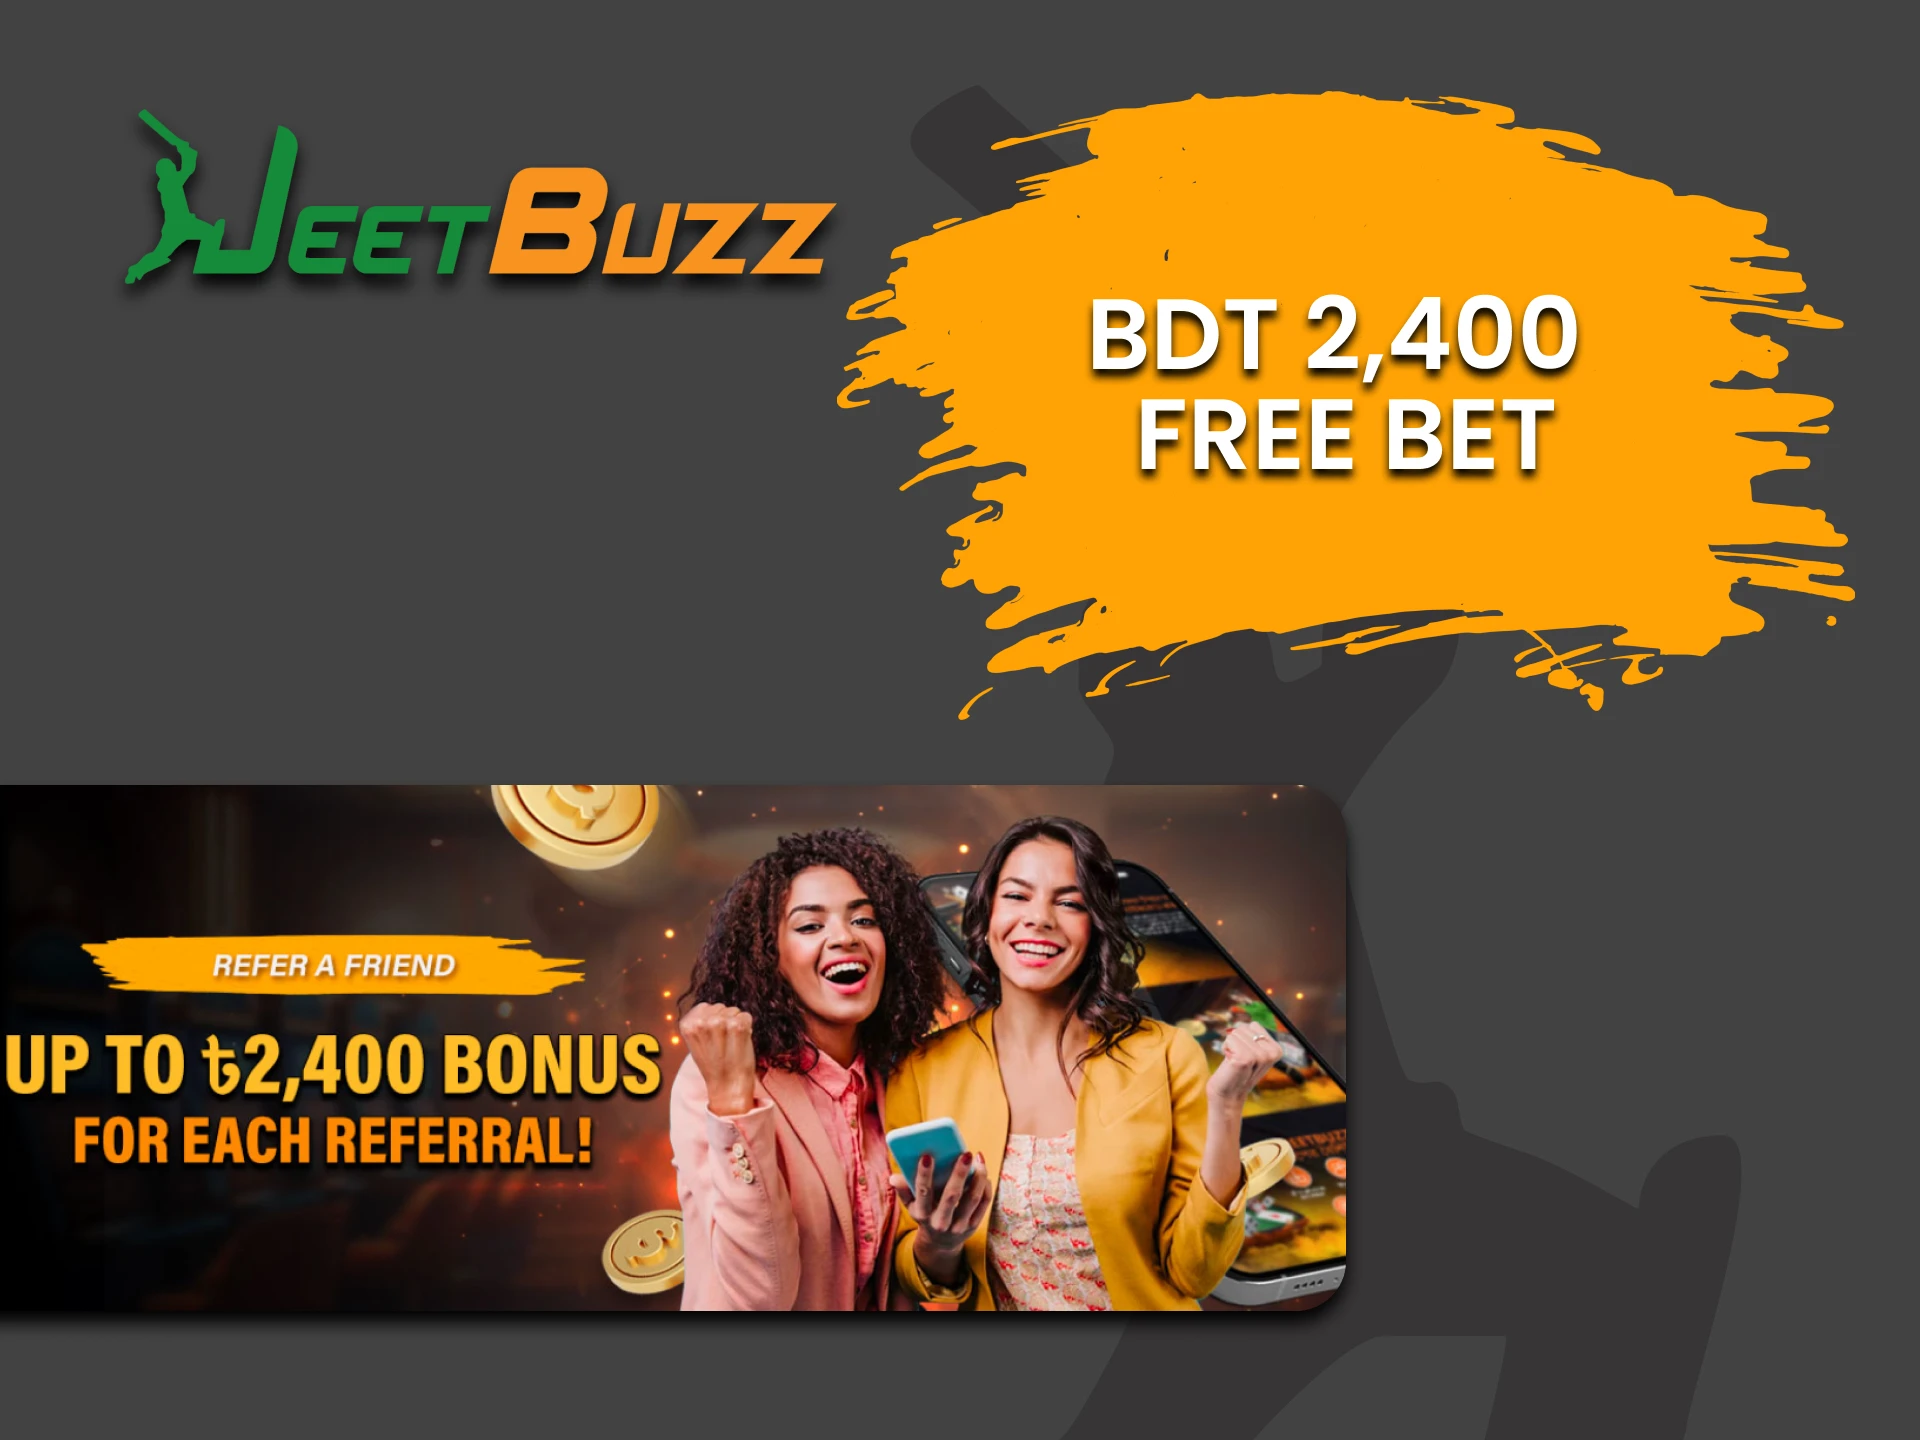 Get a special betting bonus from JeetBuzz.